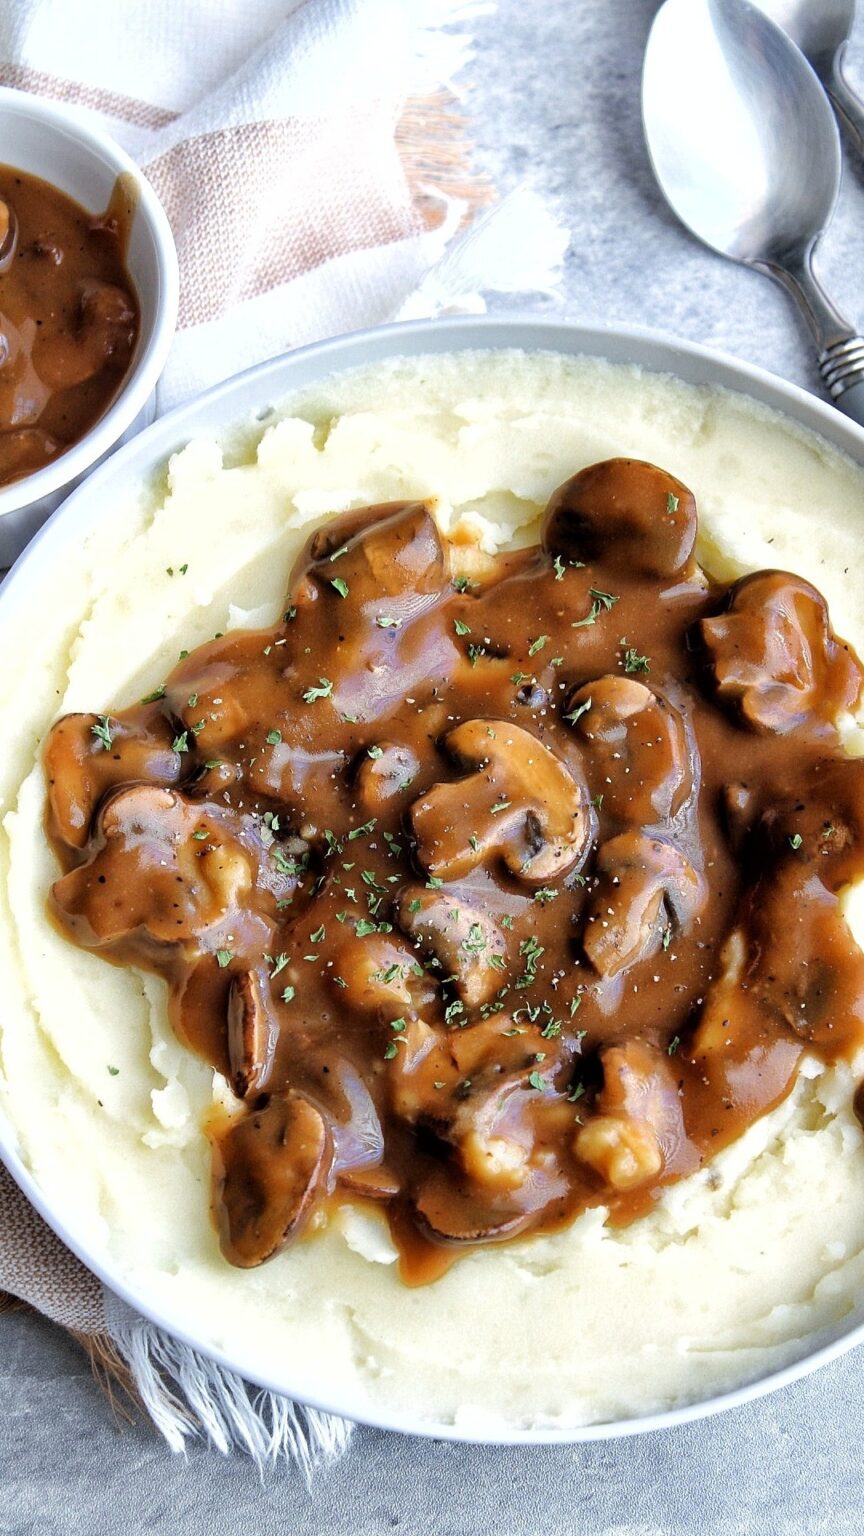 Oil-free mushroom gravy in a gray bowl filled with vegan mashed potatoes.